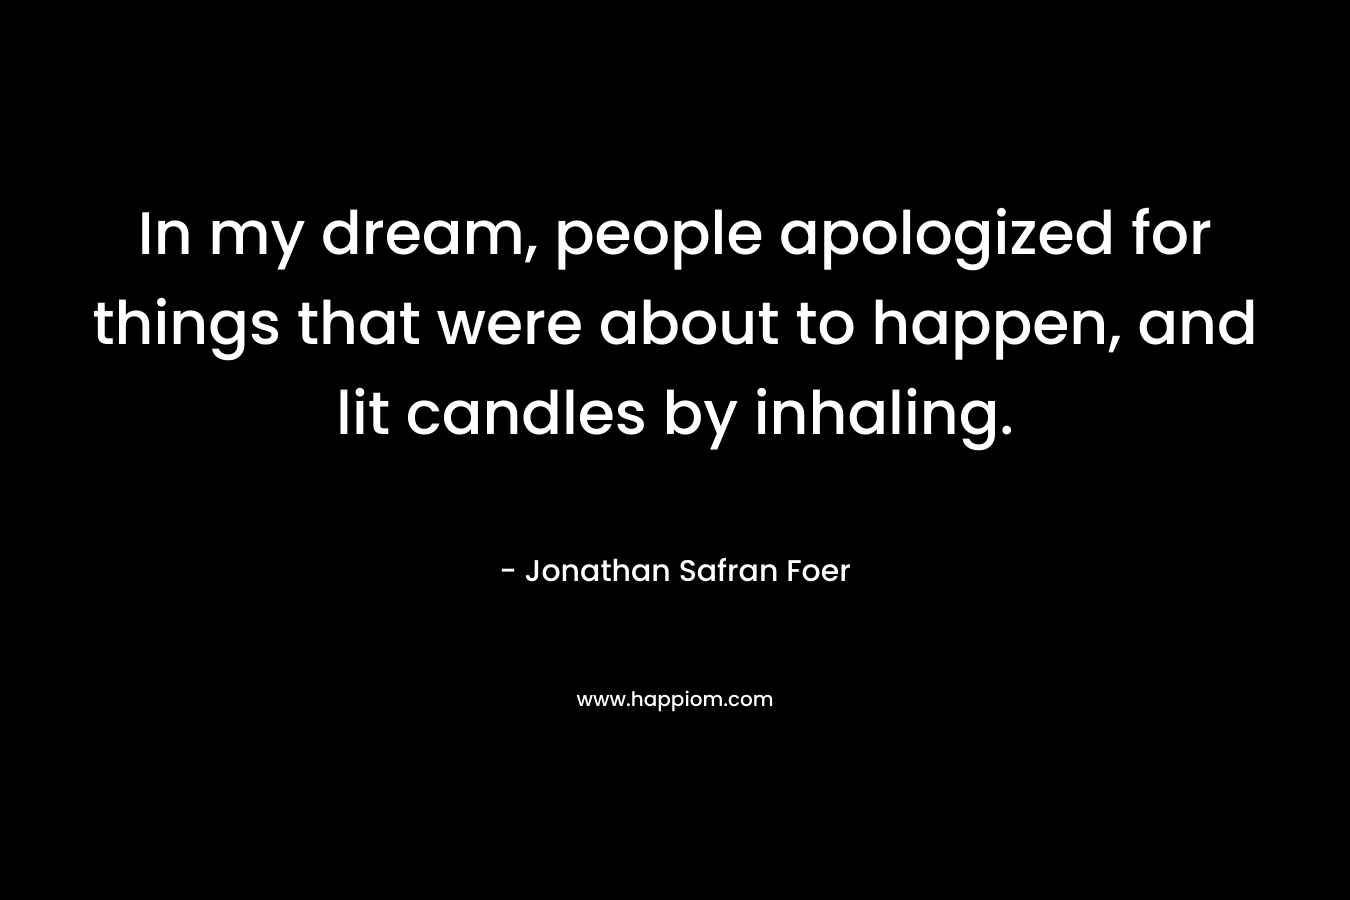 In my dream, people apologized for things that were about to happen, and lit candles by inhaling. – Jonathan Safran Foer